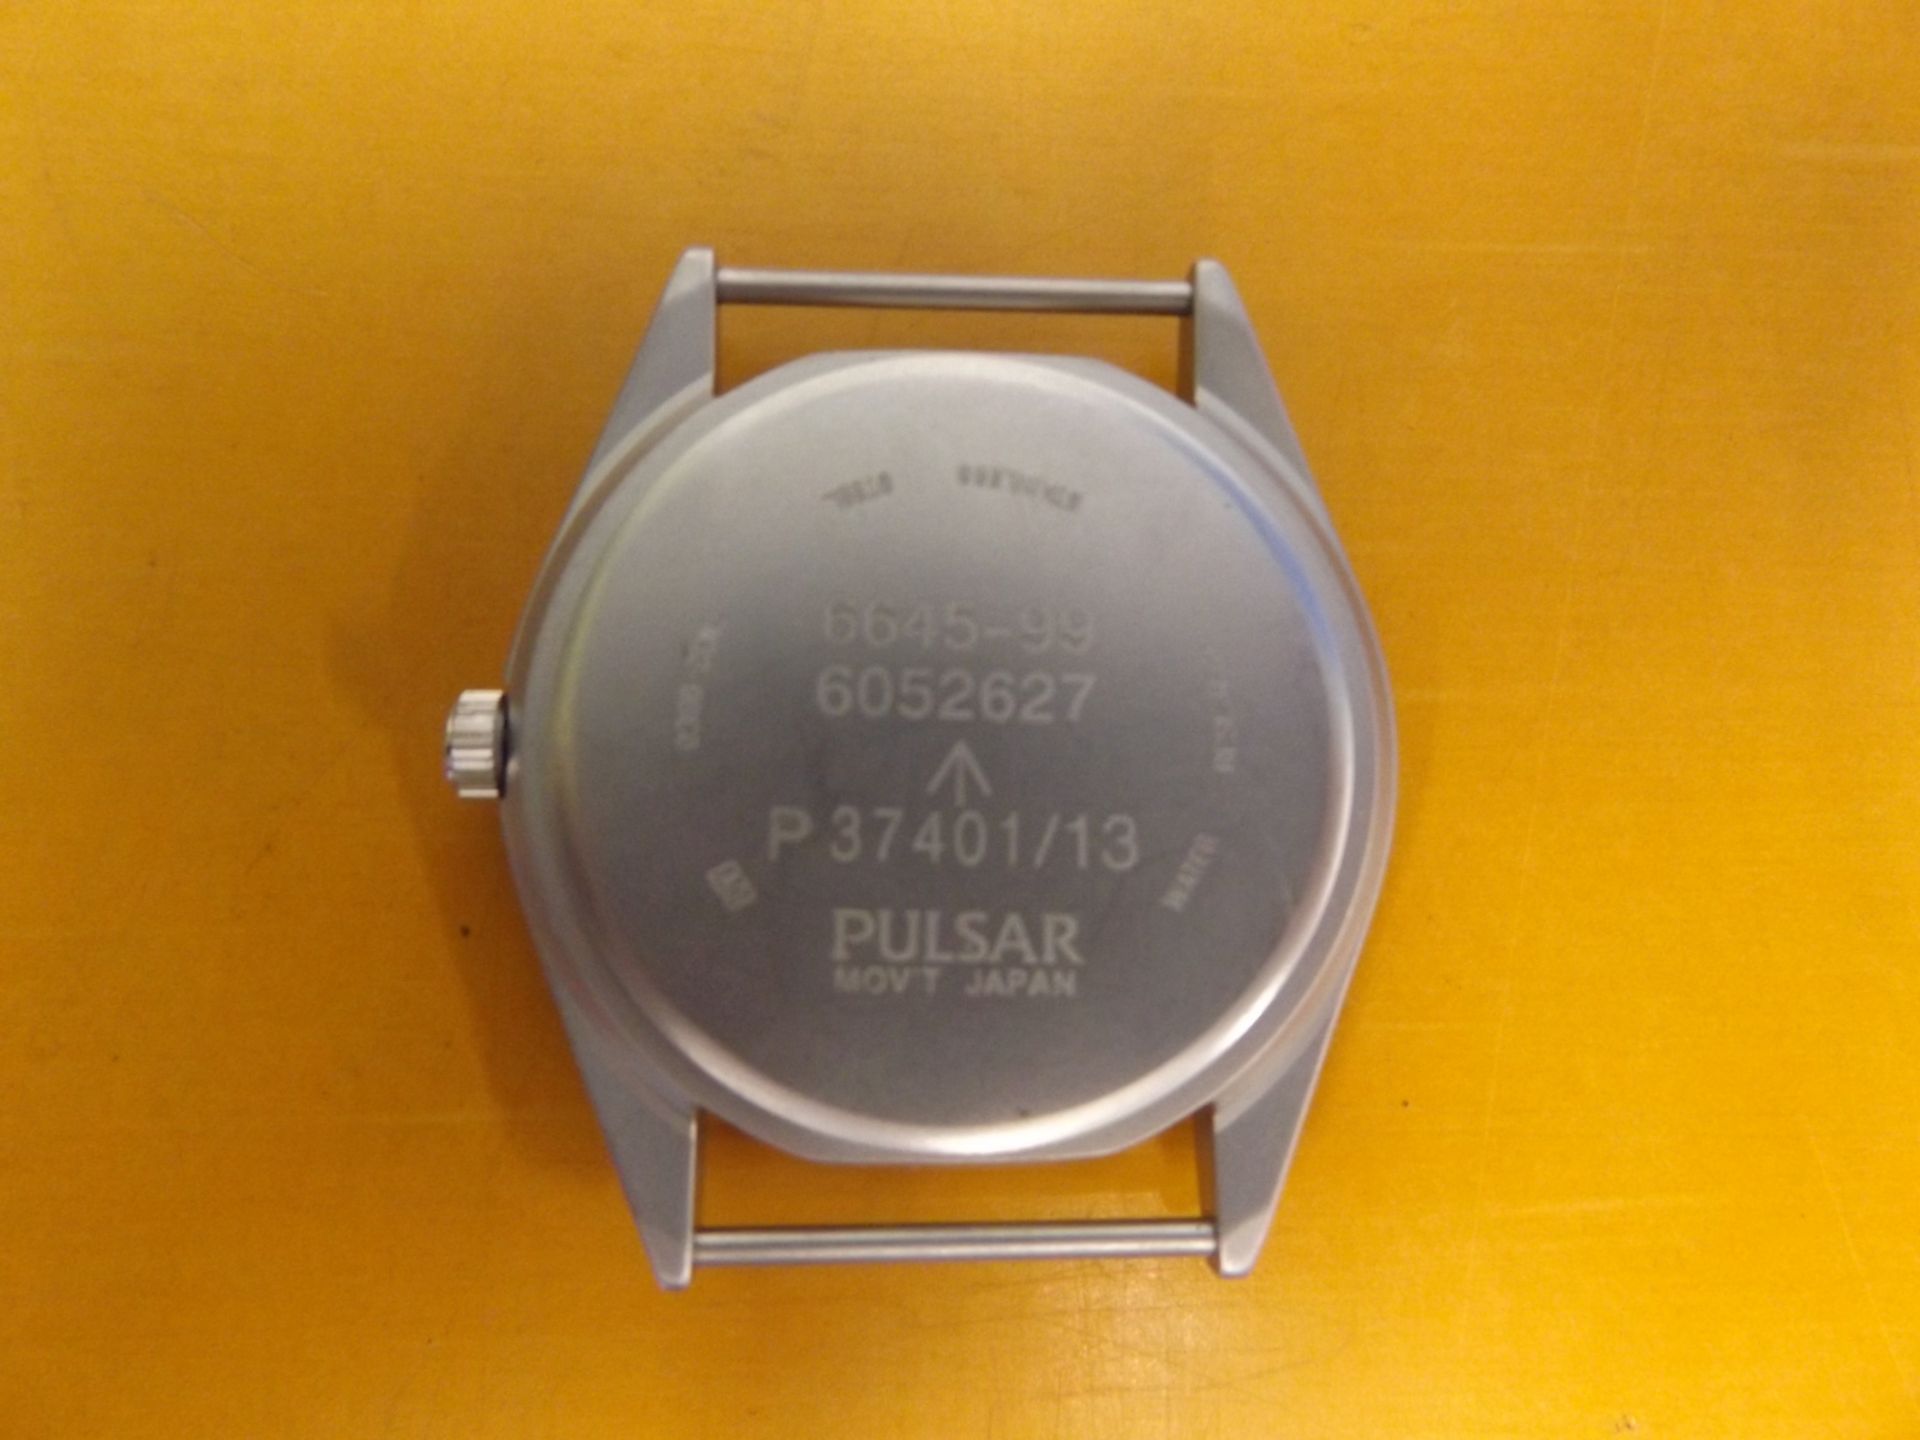 Pulsar G10 Wrist Watch - Afghan Issue - Image 7 of 8